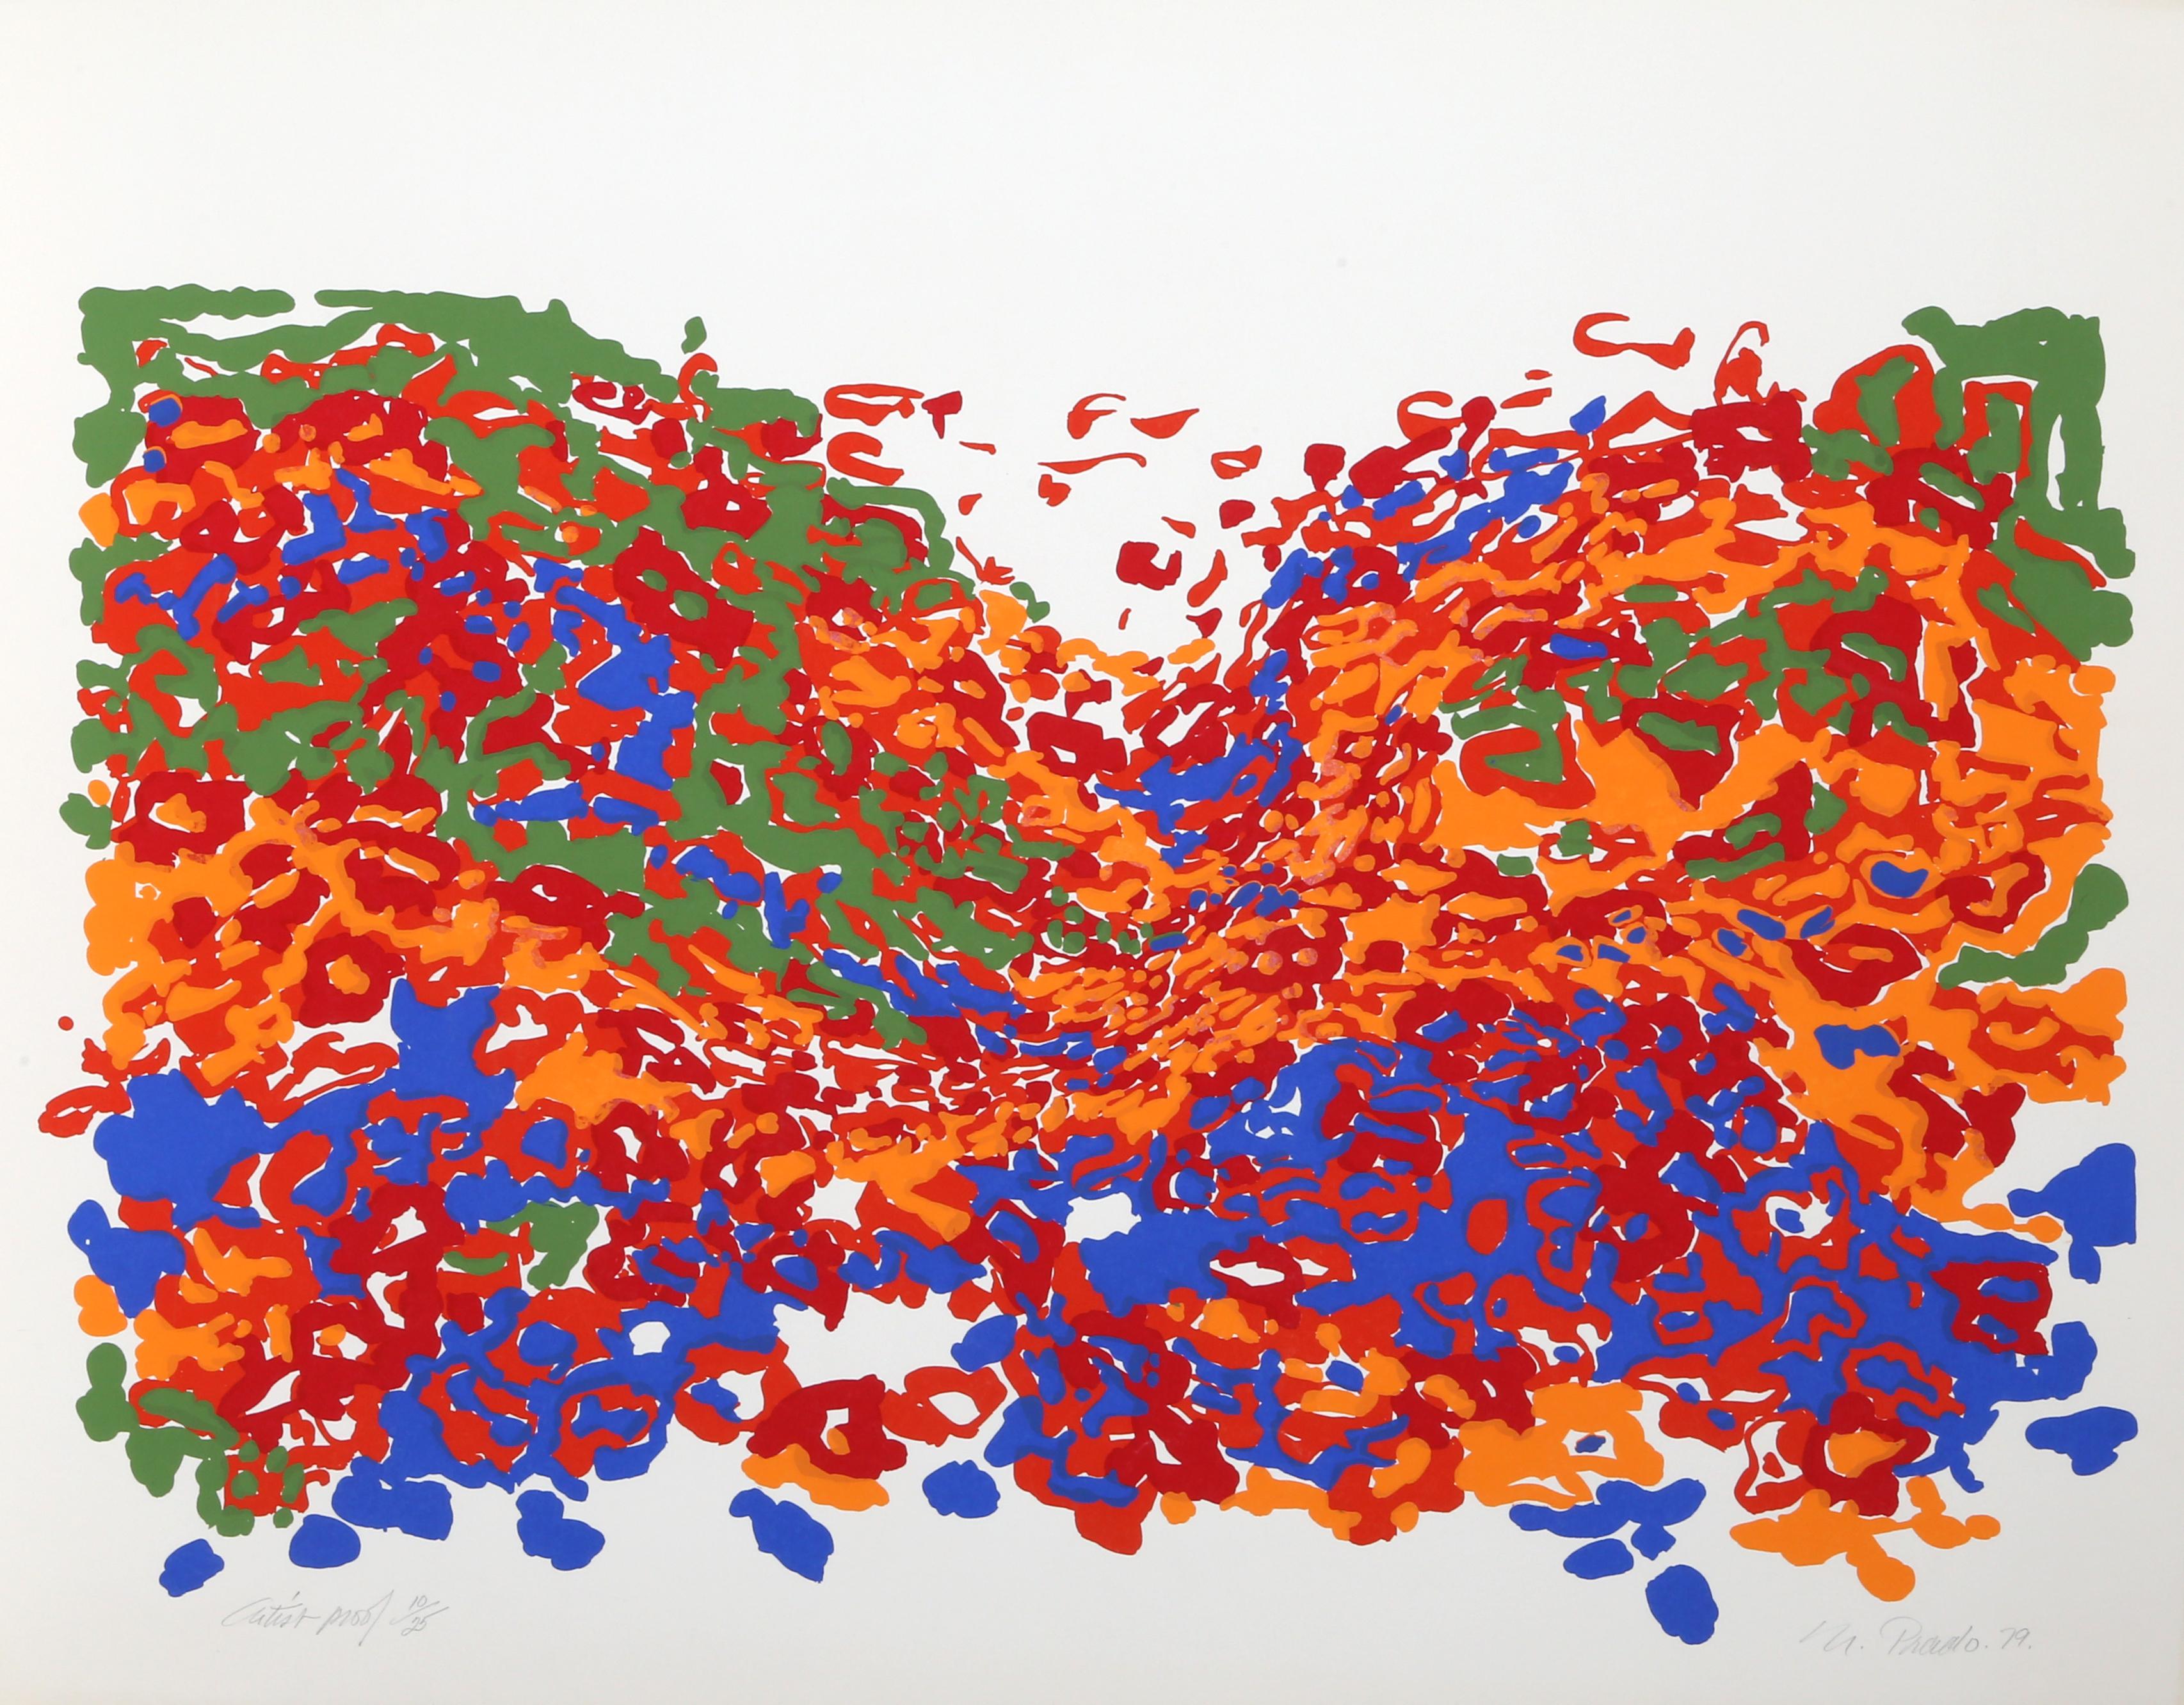 Floral Landscape
Nadine Prado, Mexican/French (1940)
Date: 1979
Screenprint, Signed in Pencil
Edition of AP 25
Size: 30 in. x 40 in. (76.2 cm x 101.6 cm)